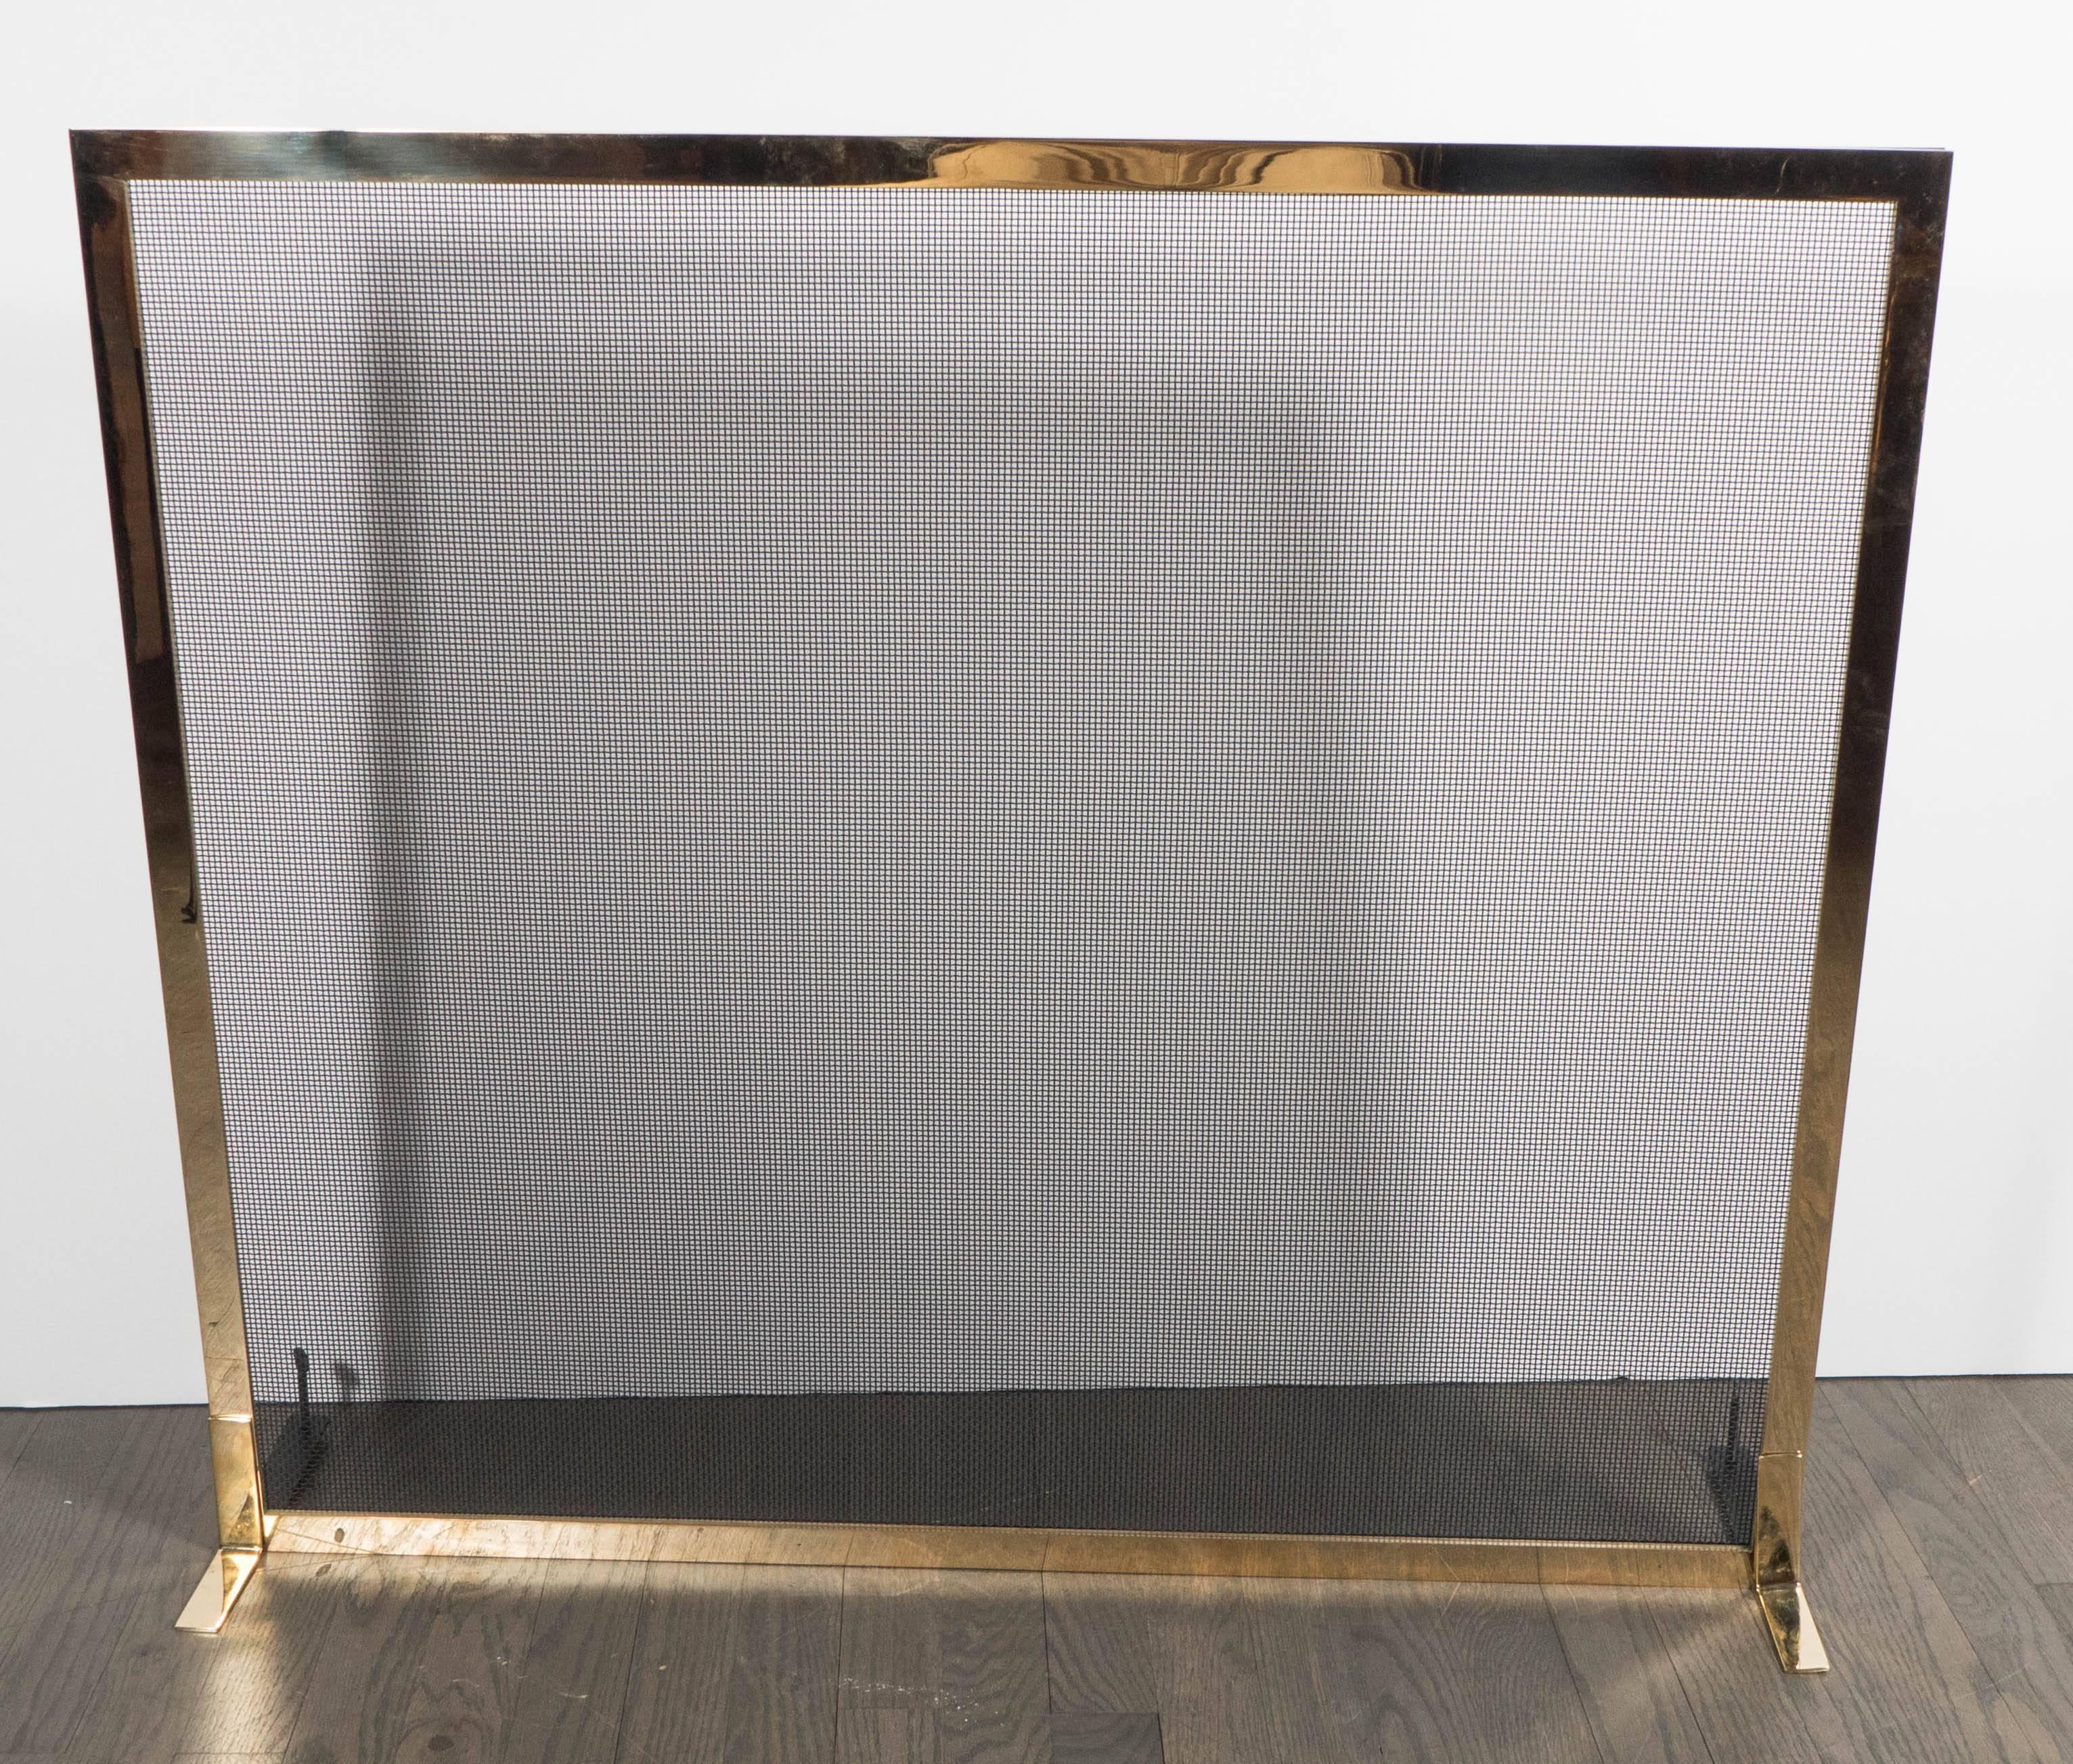 This elegant and understated fire screen was realized by artisans in New York State exclusively for us. It features a rectilinear frame in polished and lacquered brass with iron mesh in its center. With its austere form and clean, modernist lines,